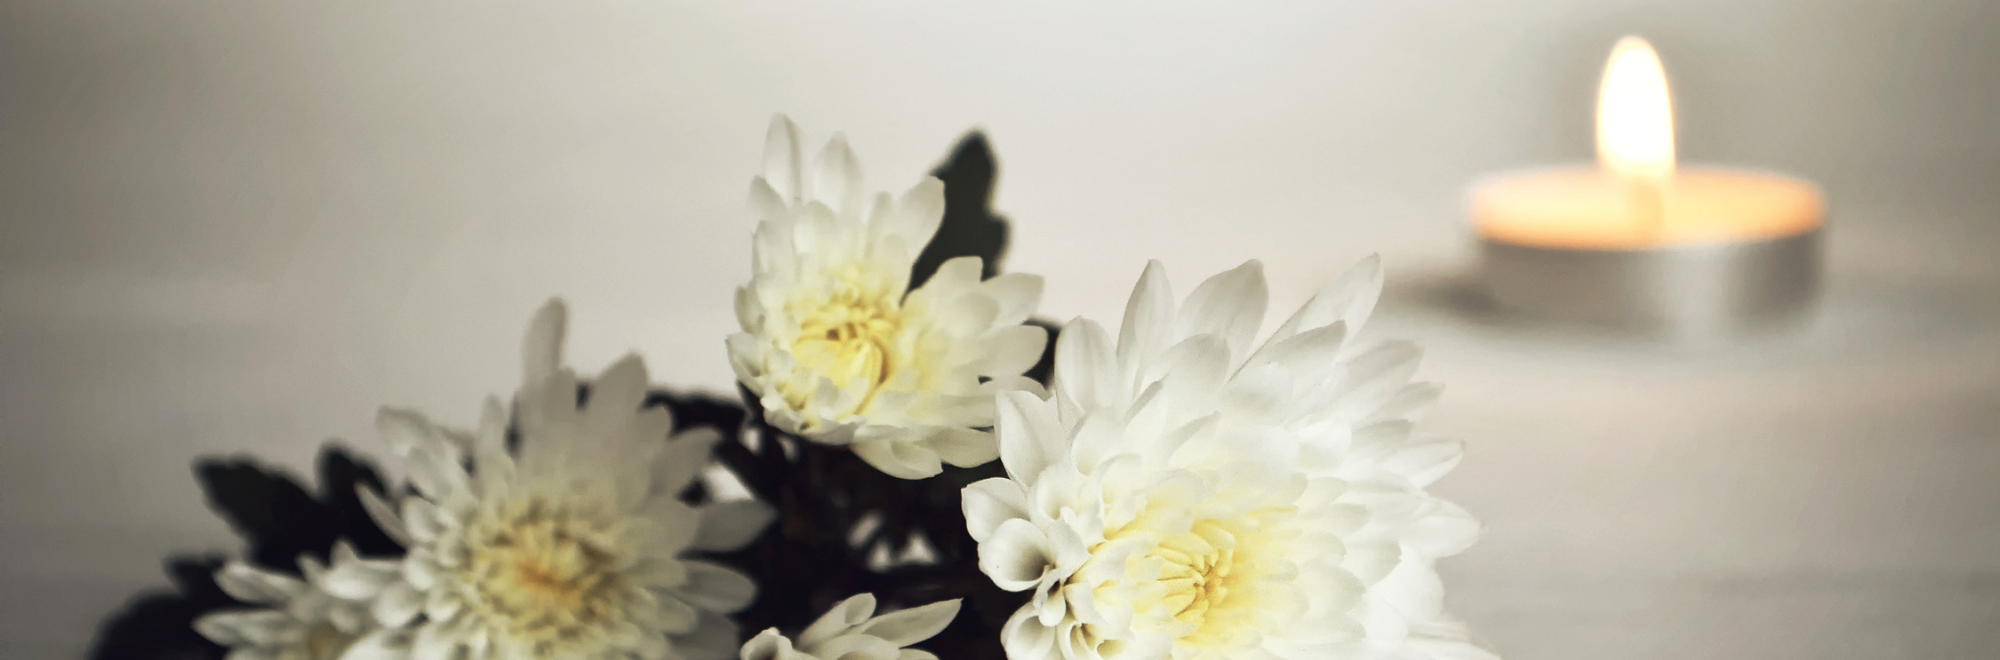 Close up on a bouquet of white flowers laying on its side, a single tea light candle lit in the background.